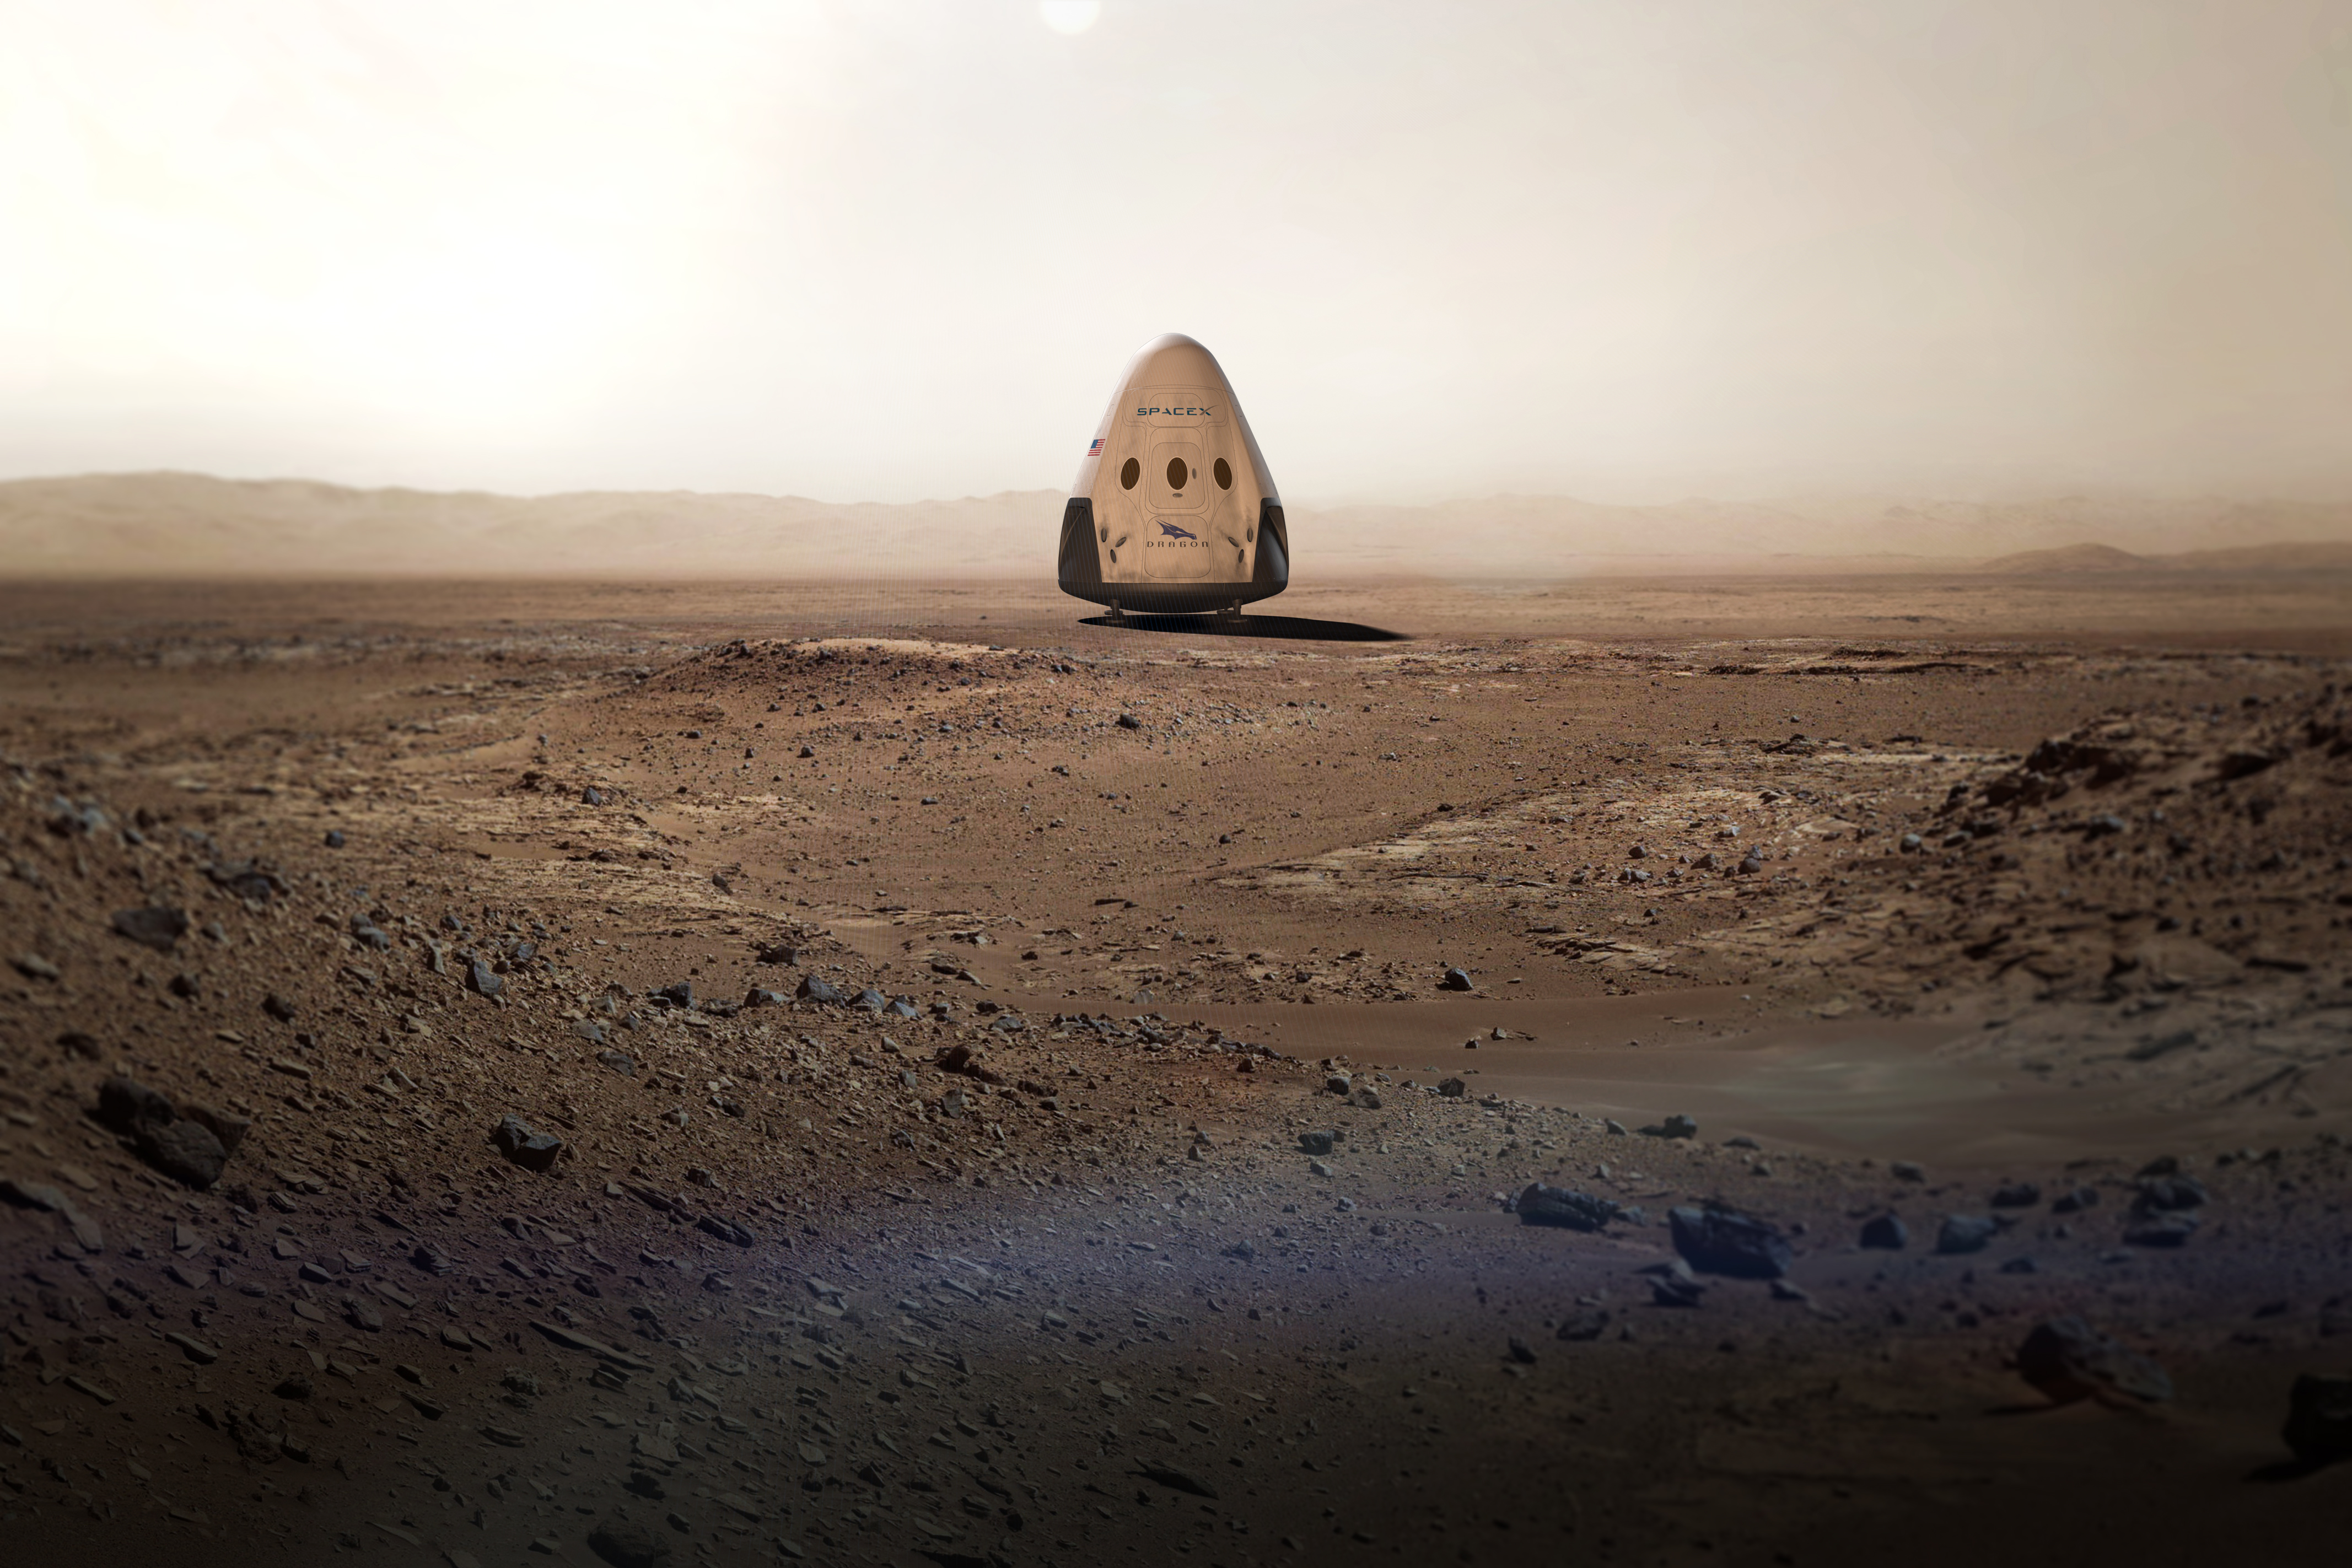 Mission (to be) accomplished: An artist's rendering of the SpaceX vehicle on Mars (Space X)